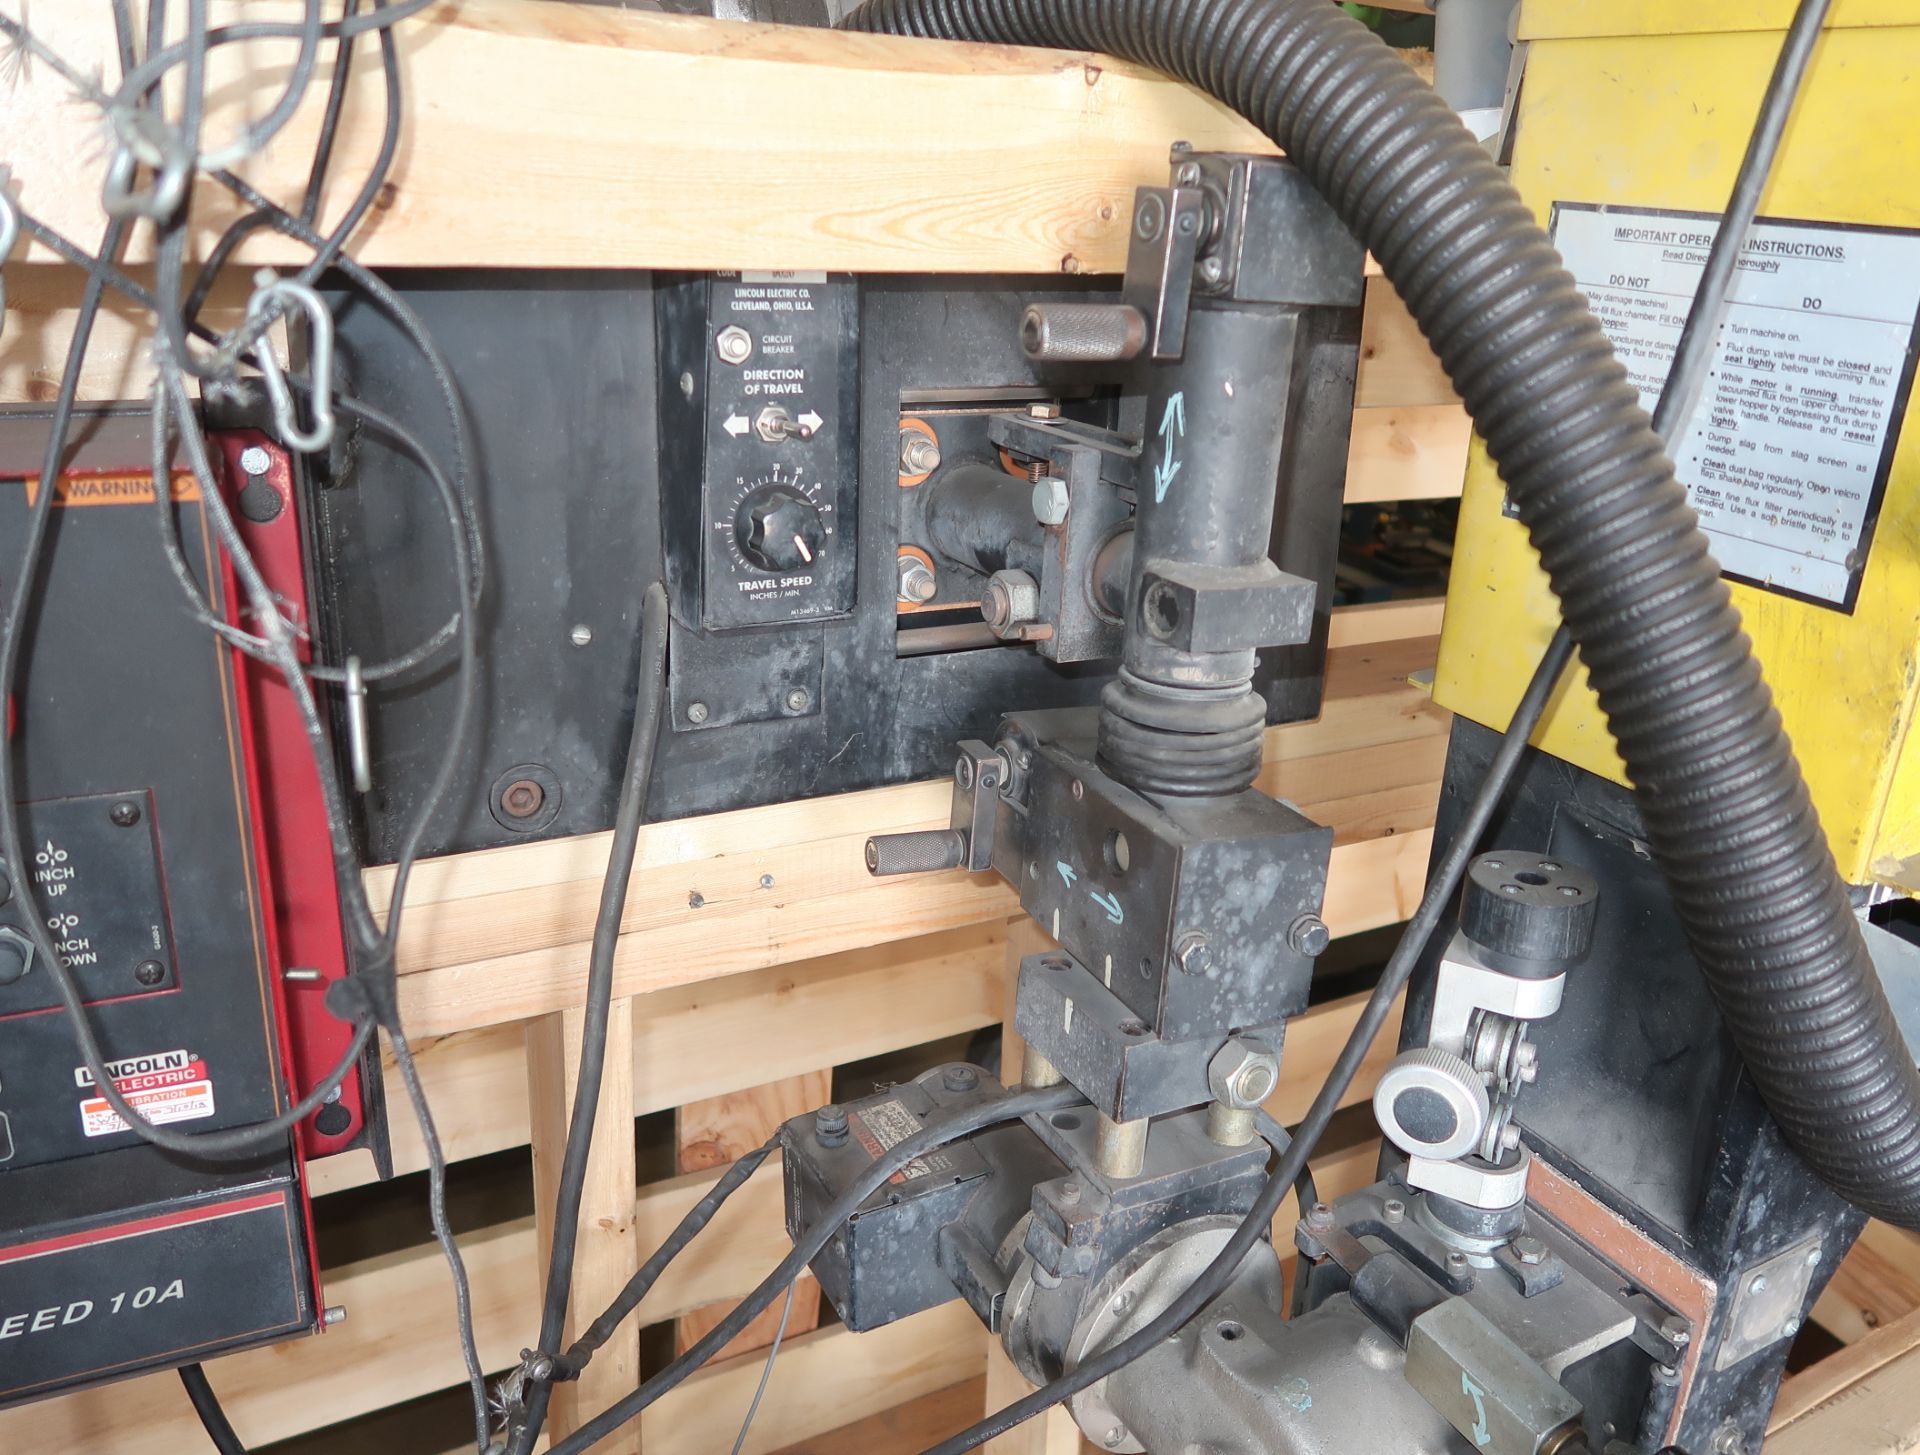 LINCOLN ELECTRIC SUB-ARC WELDER, LINCOLN POWER WAVE 1000 AC/DC WELDER, W/POWERFEED, ETC. - Image 3 of 10